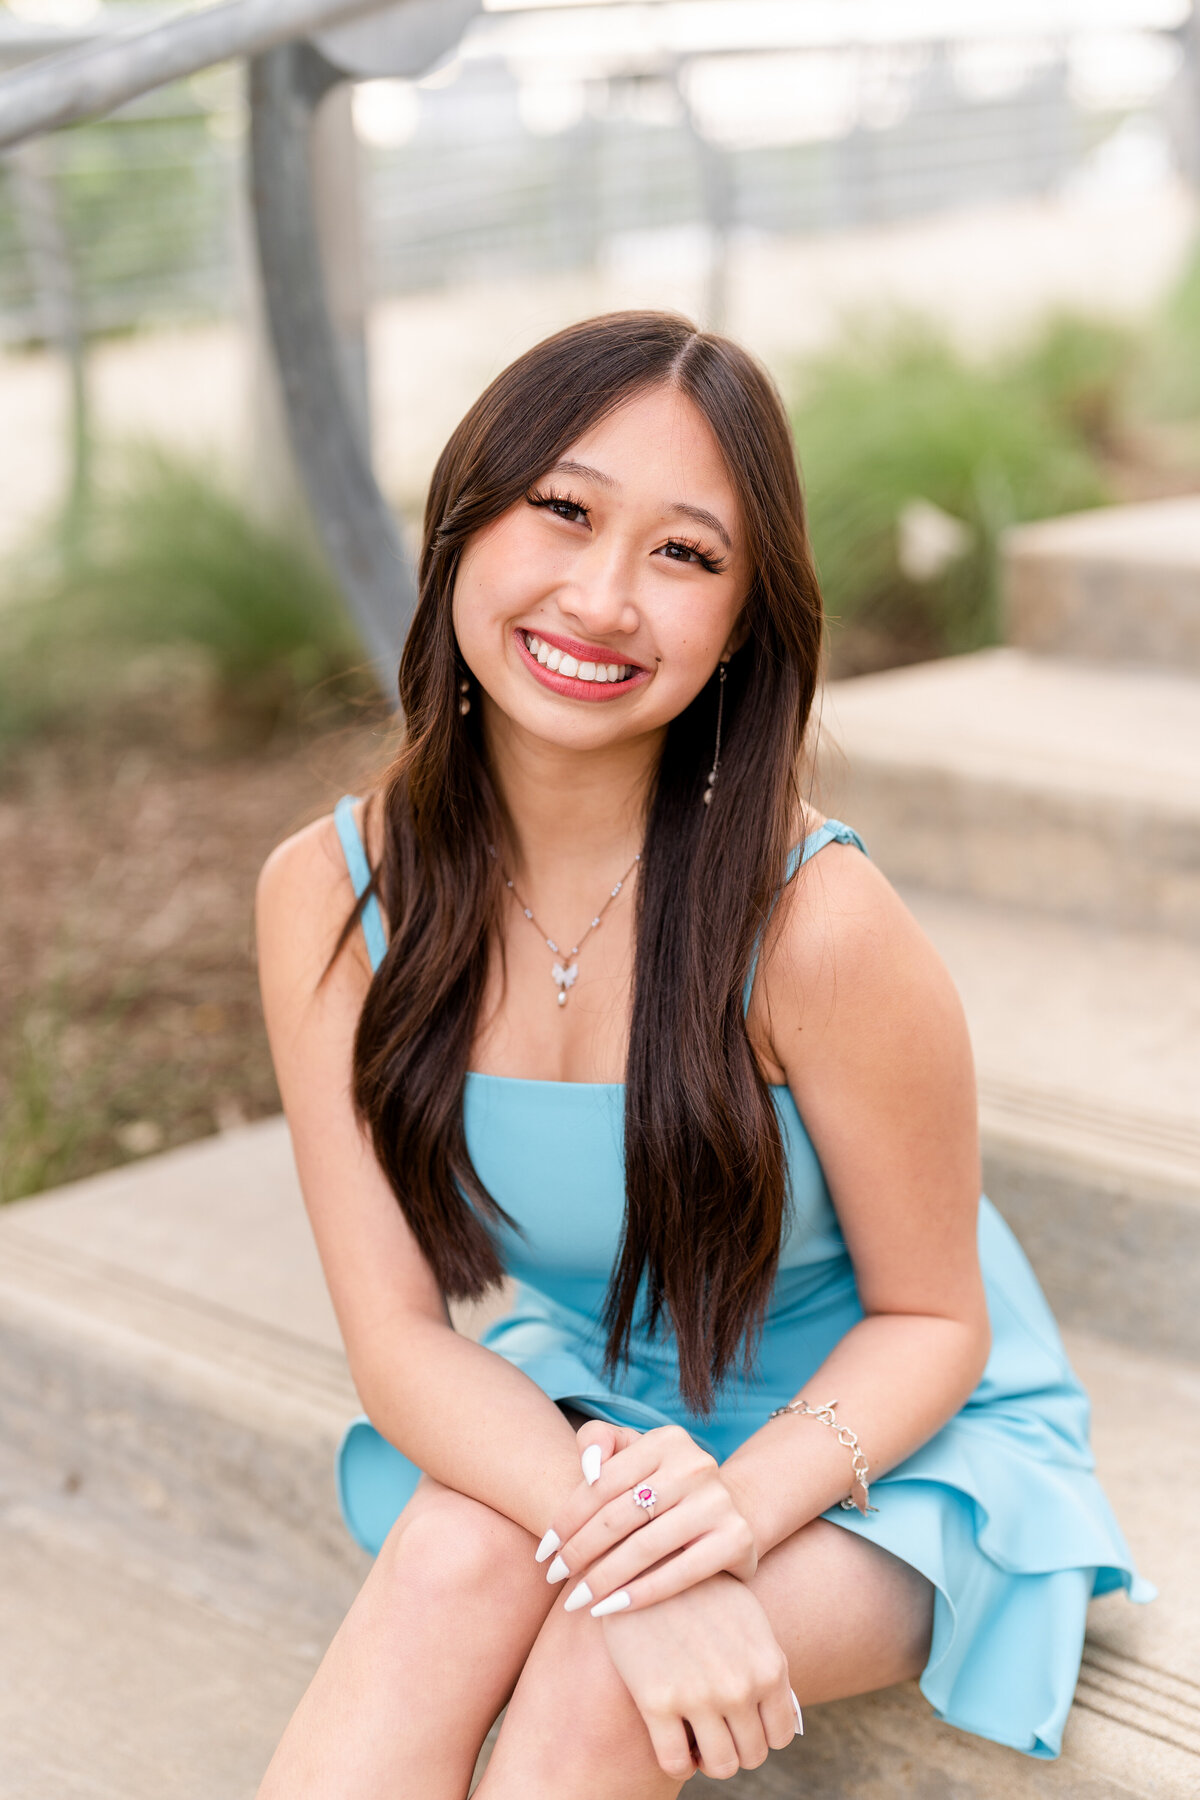 Houston High School senior girl sitting on steps and leaning on knees while smiling and wearing baby blue dress in Downtown Houston